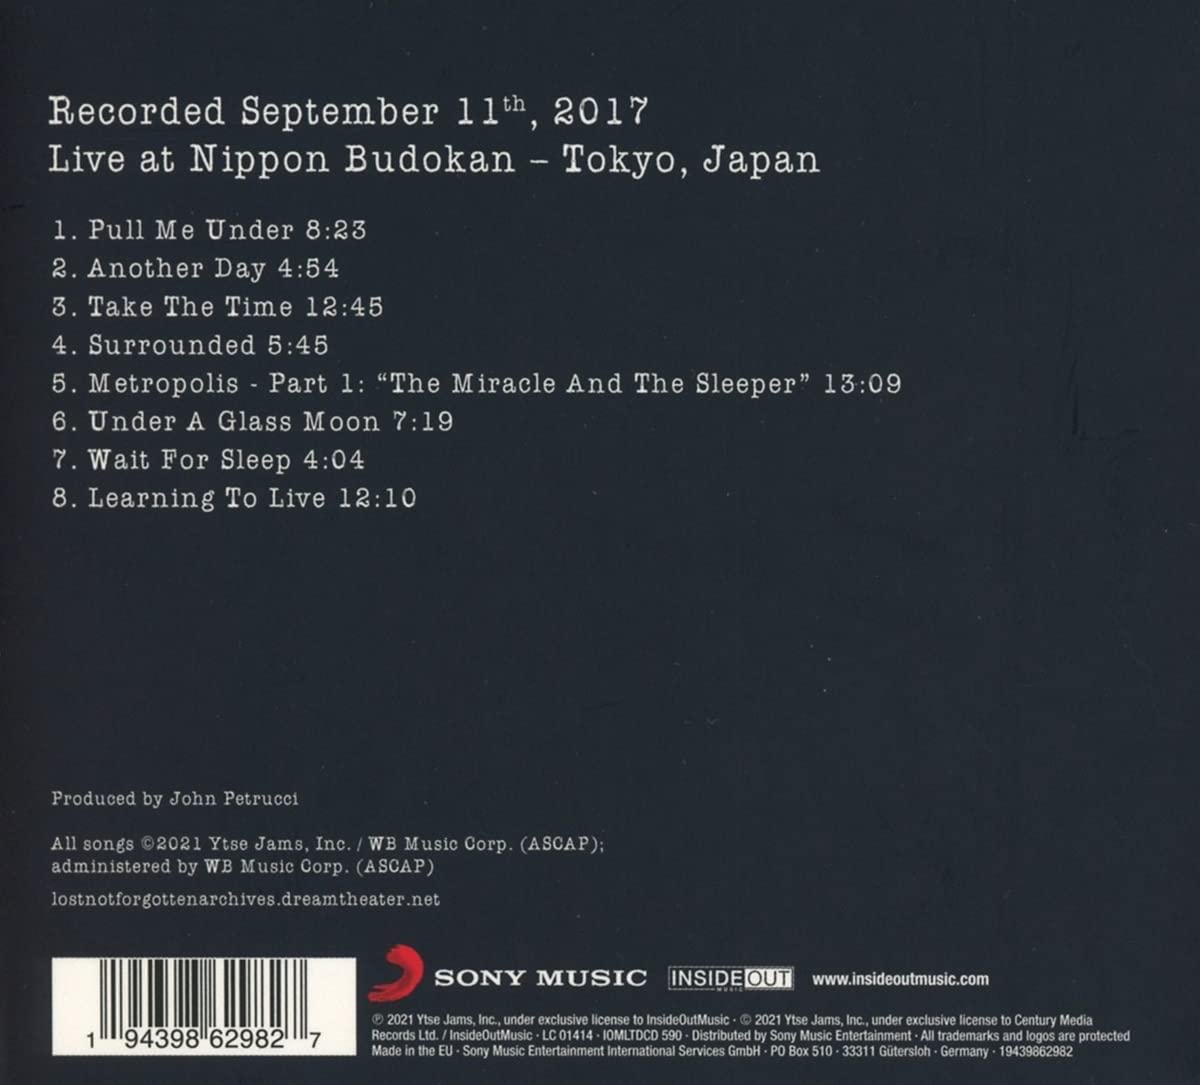 Lost Not Forgotten Archives: Images and Words - Live in Japan, 2017 | Dream Theater